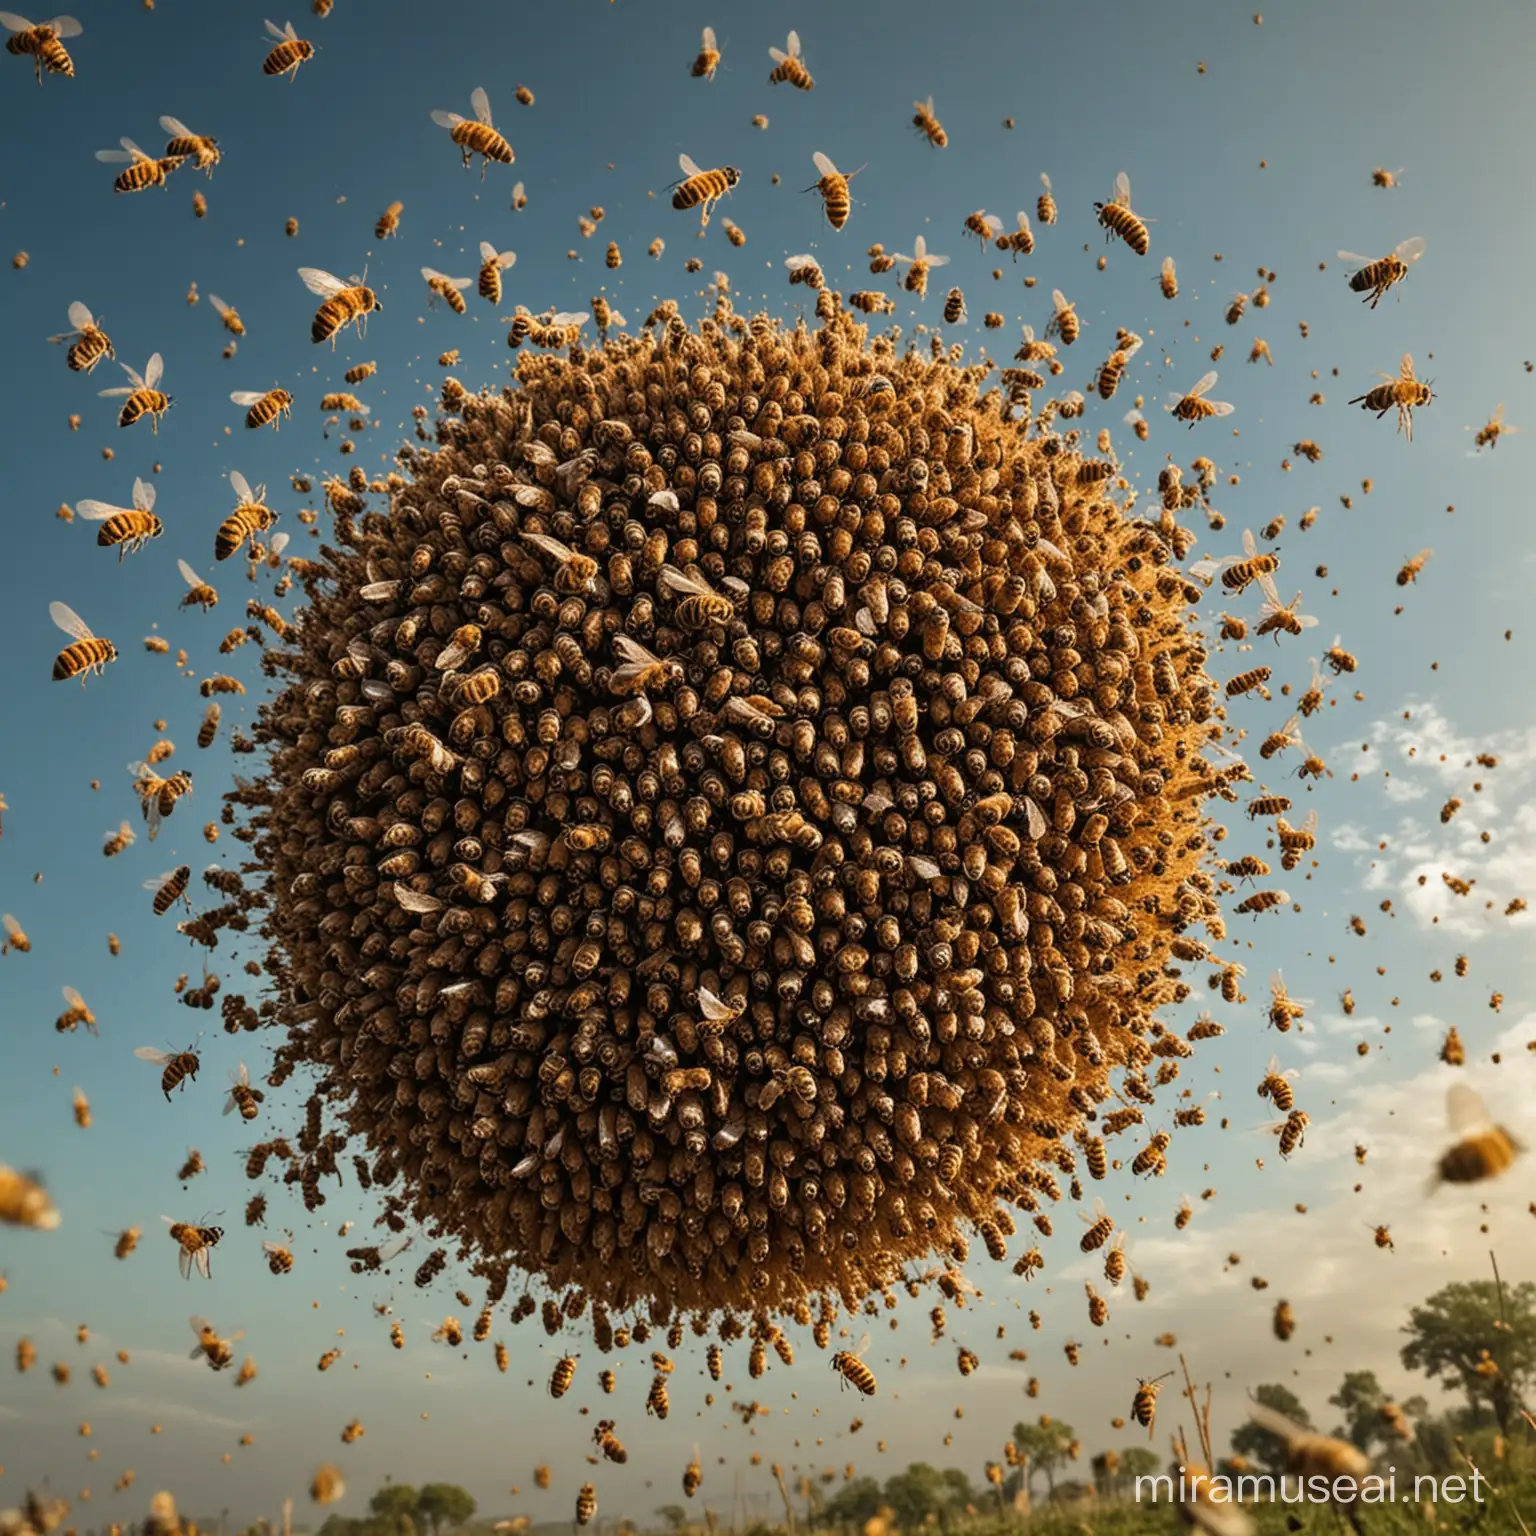 A large swarm of bees flying around a royal queen